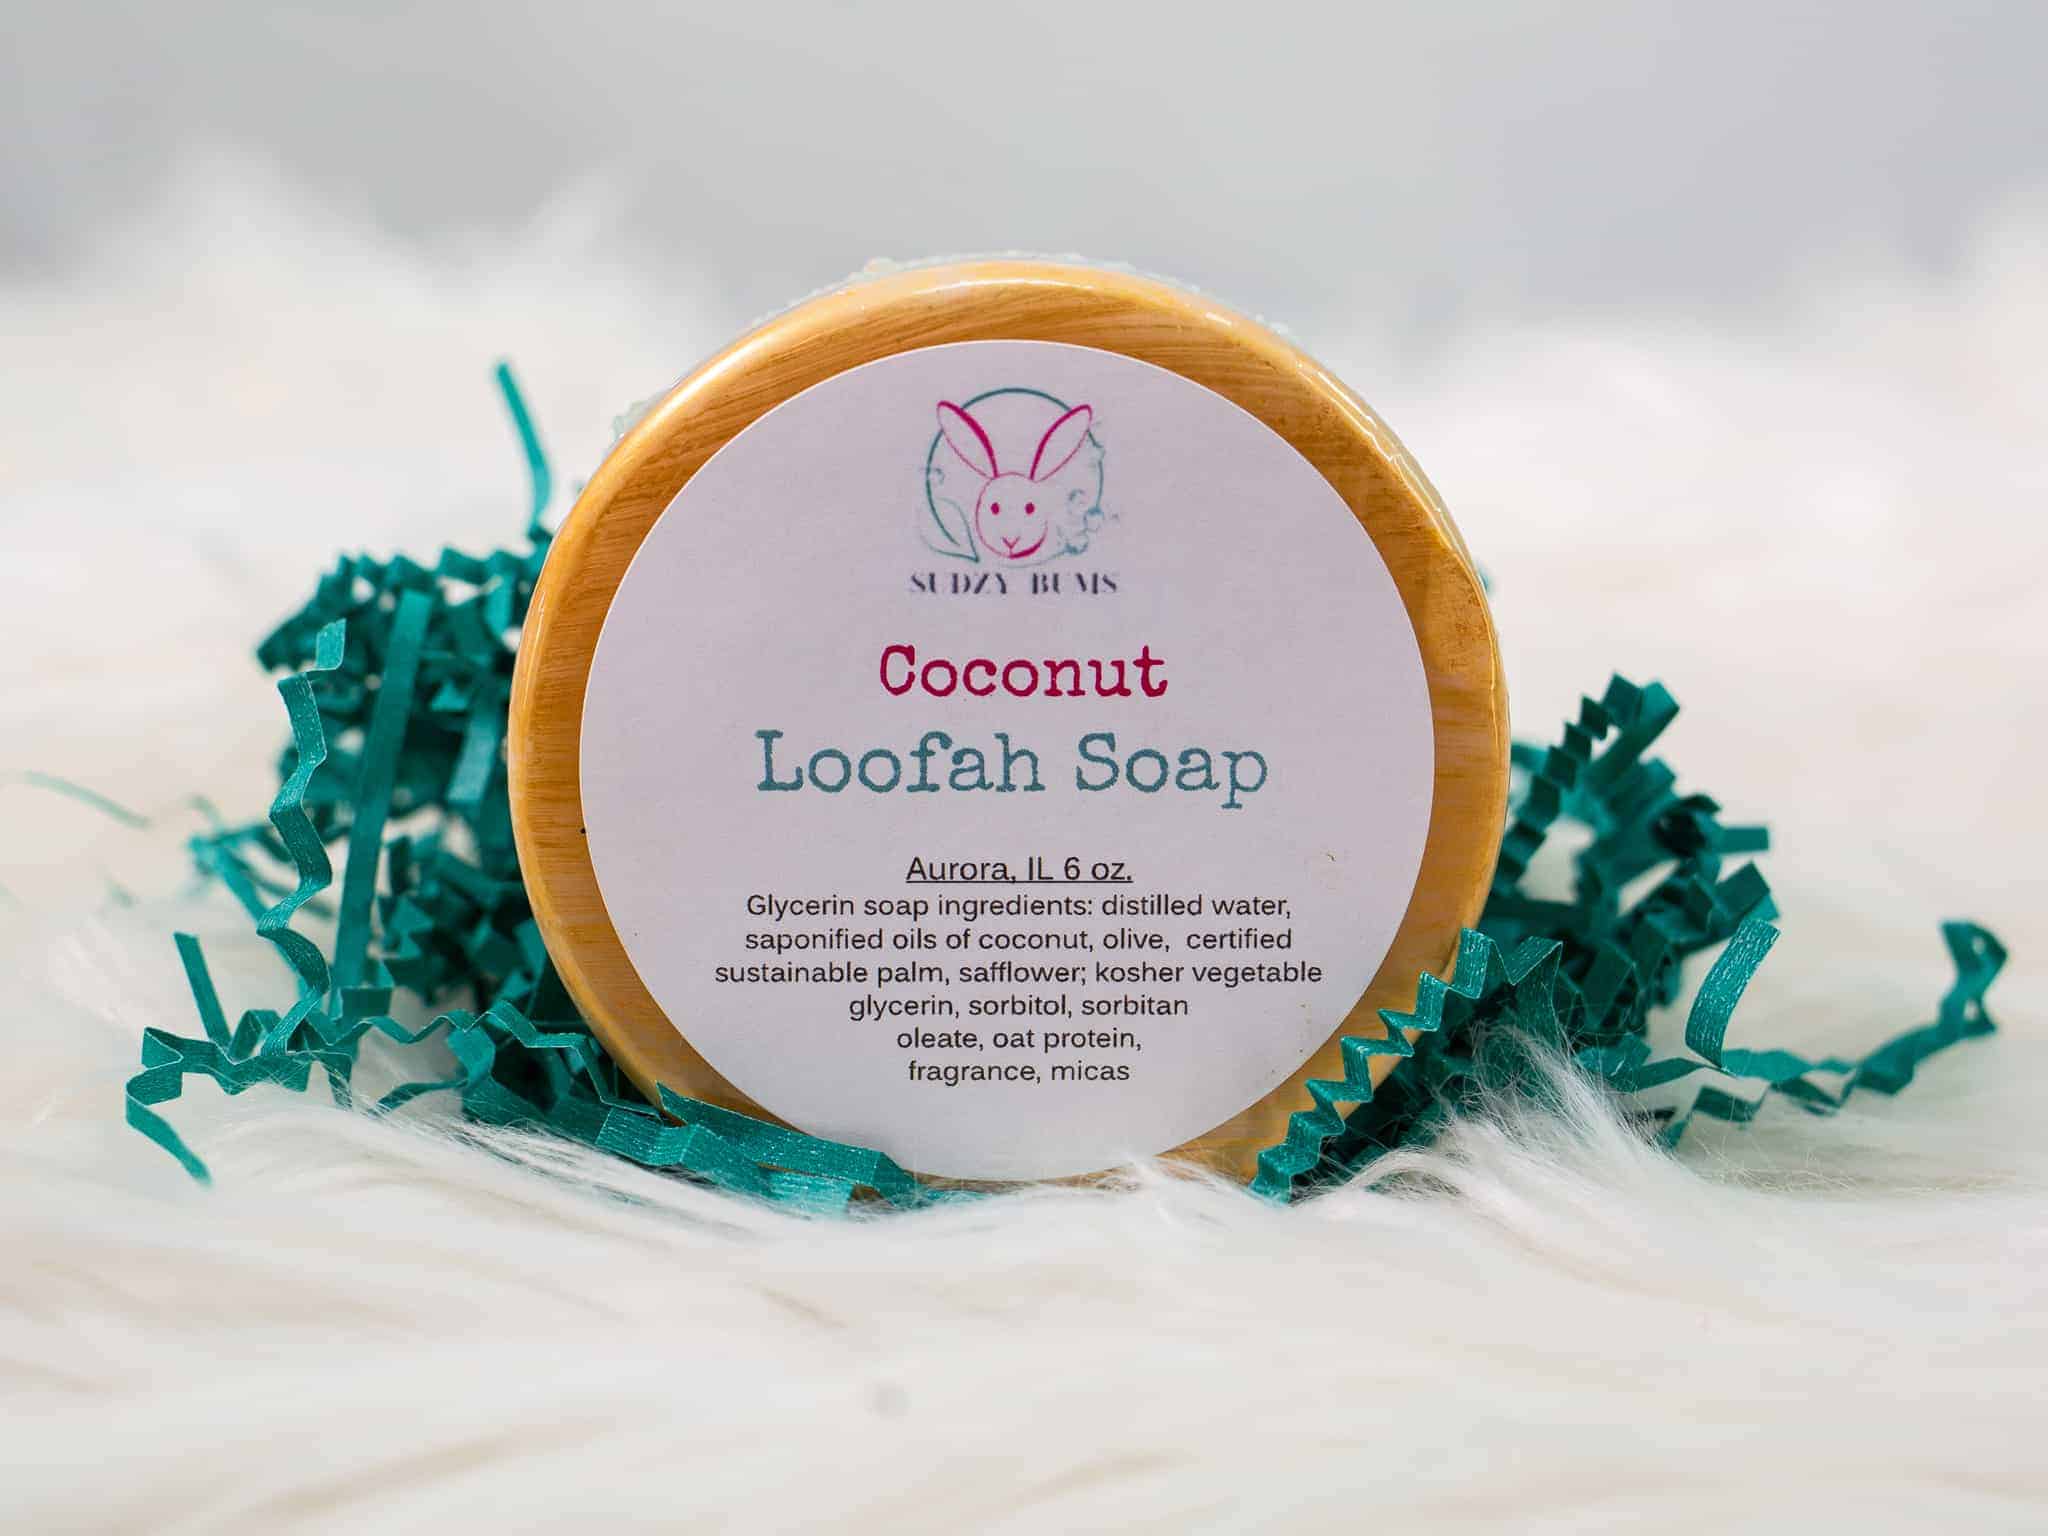 This Coconut Loofah soap is made with love by Sudzy Bums! Shop more unique gift ideas today with Spots Initiatives, the best way to support creators.